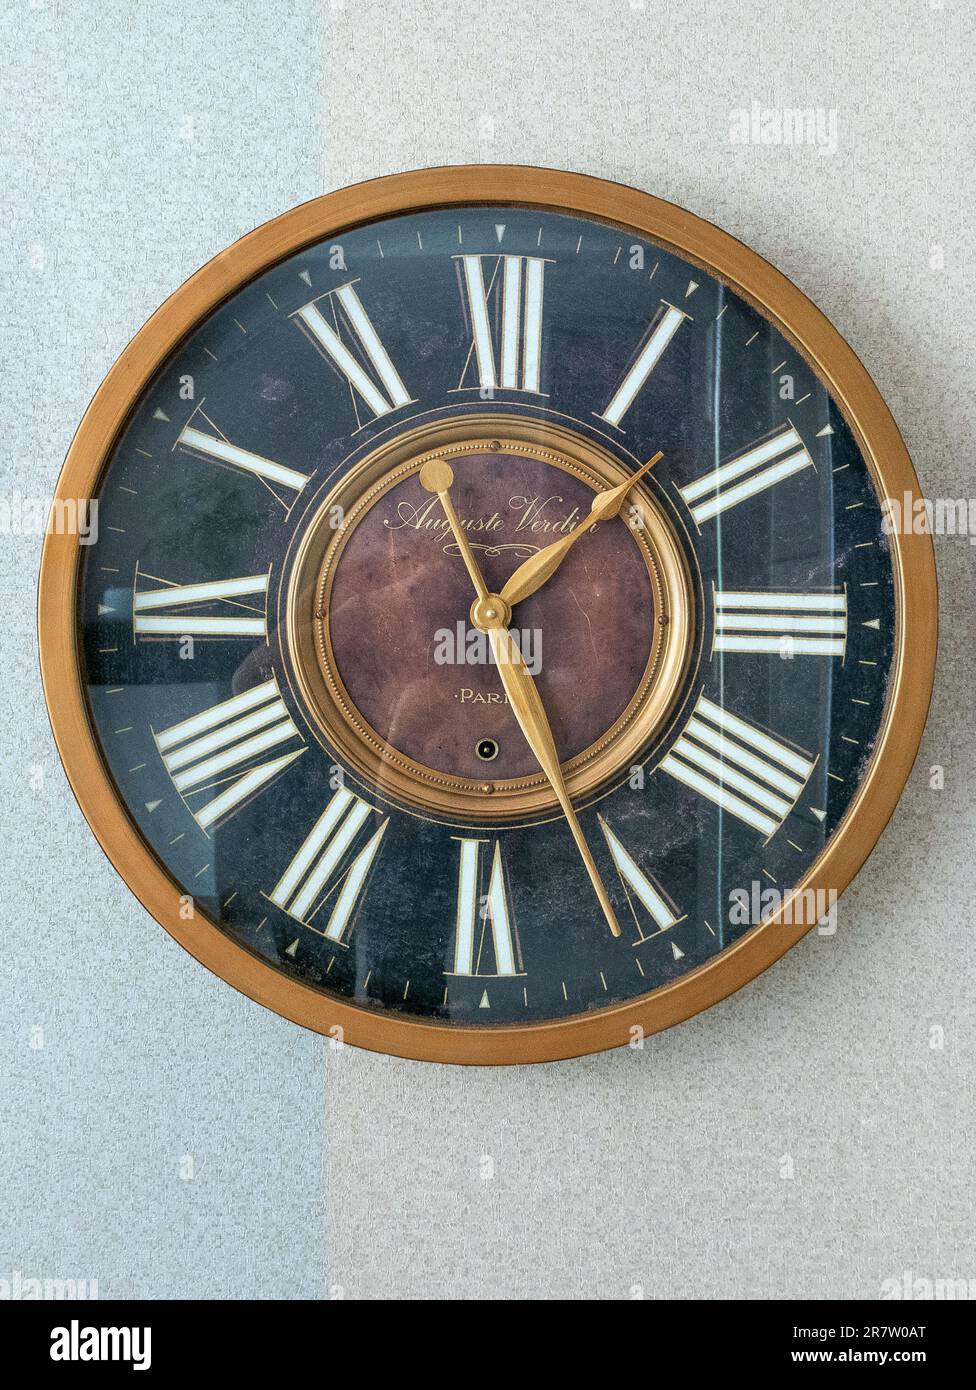 Medellin, Antioquia, Colombia - May 31 2022: Large Clock with Paris Time Zone on a White Wall Stock Photo